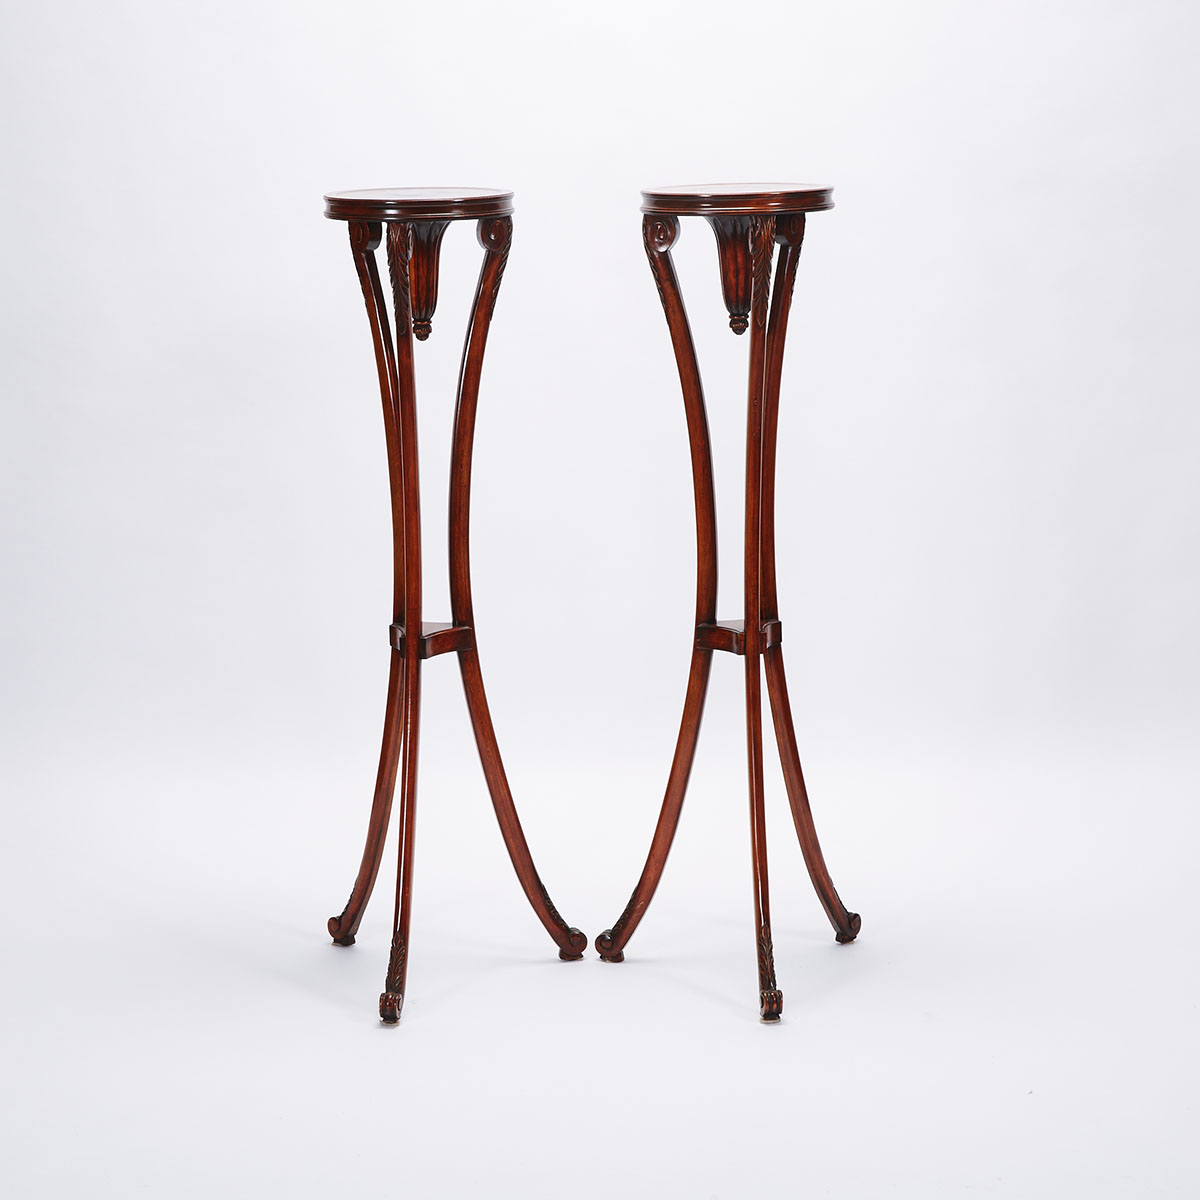 Pair of Regency Style Carved Mahogany Pedestal Stands, 19th century